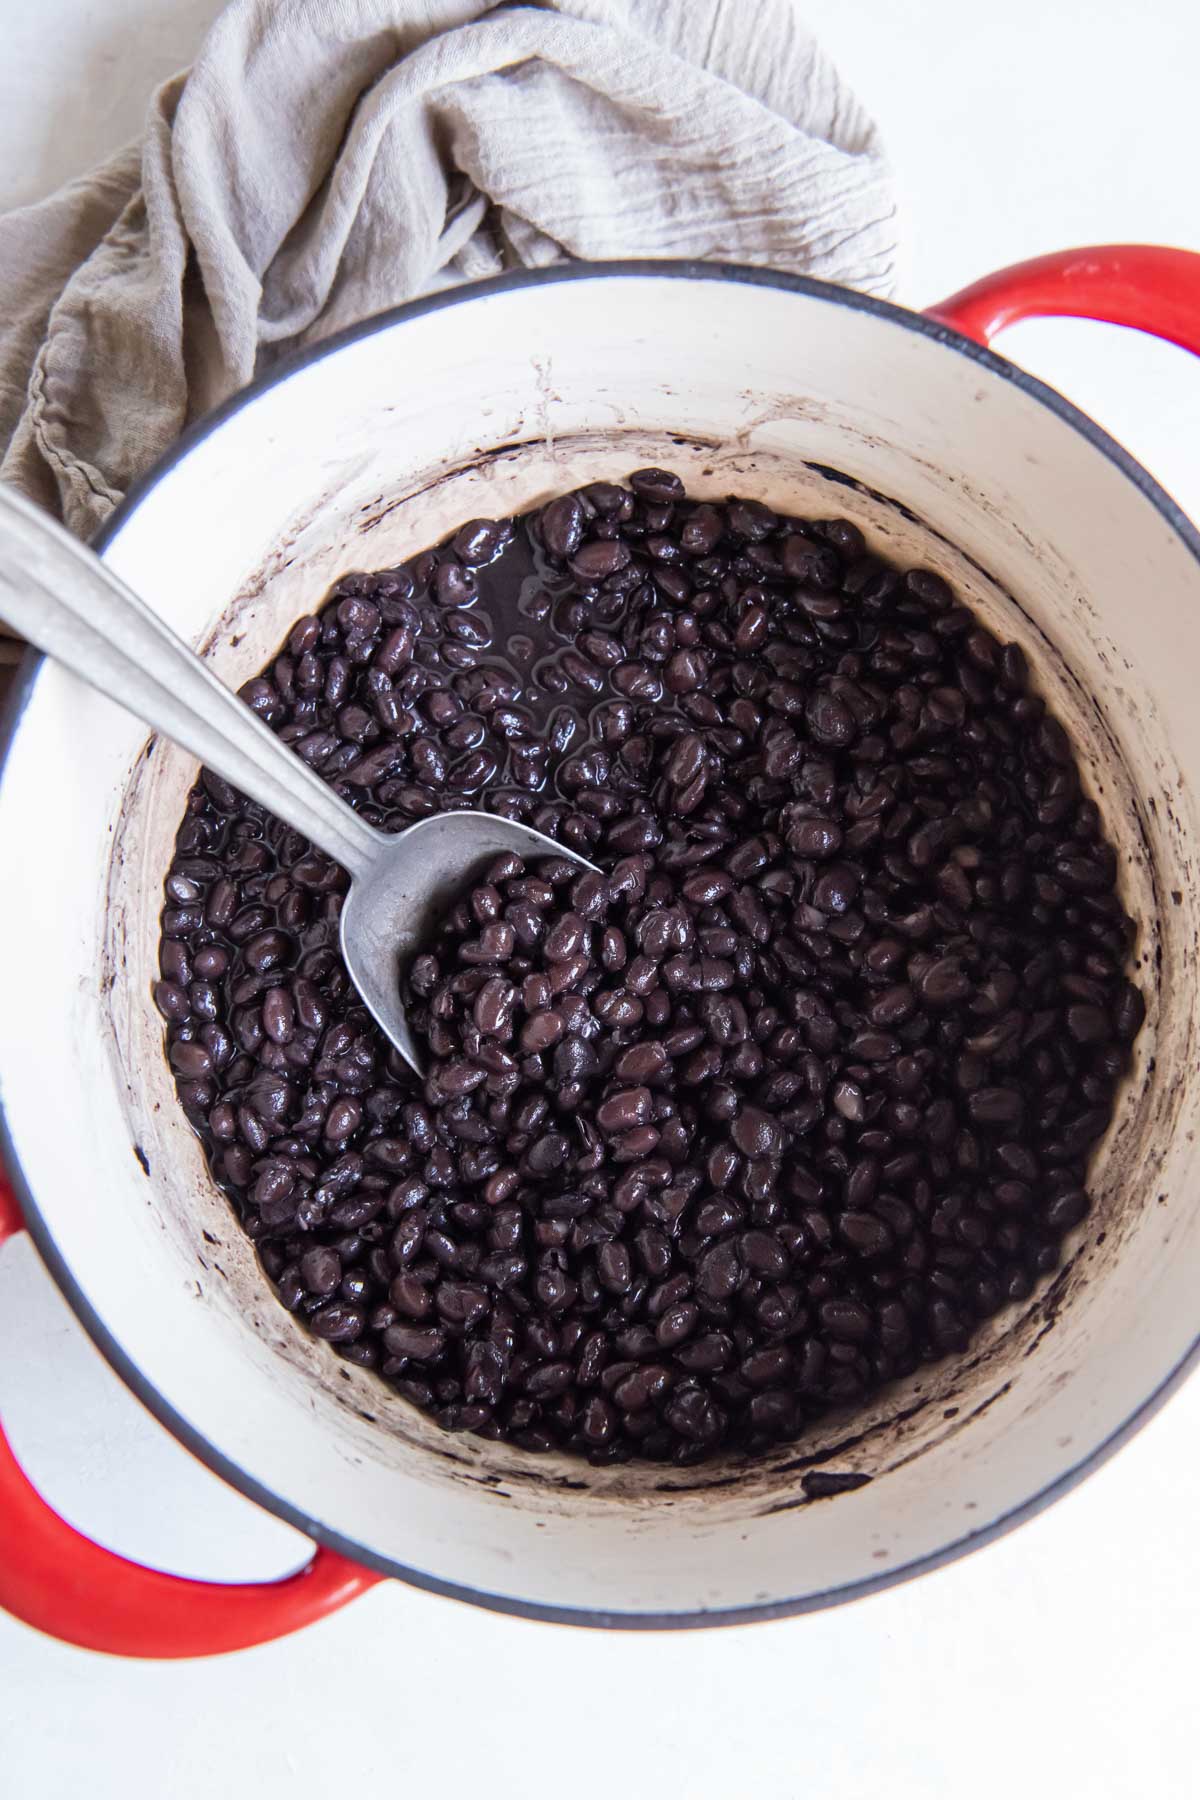 Cooked black beans from scratch in Dutch oven pot with serving spoon.